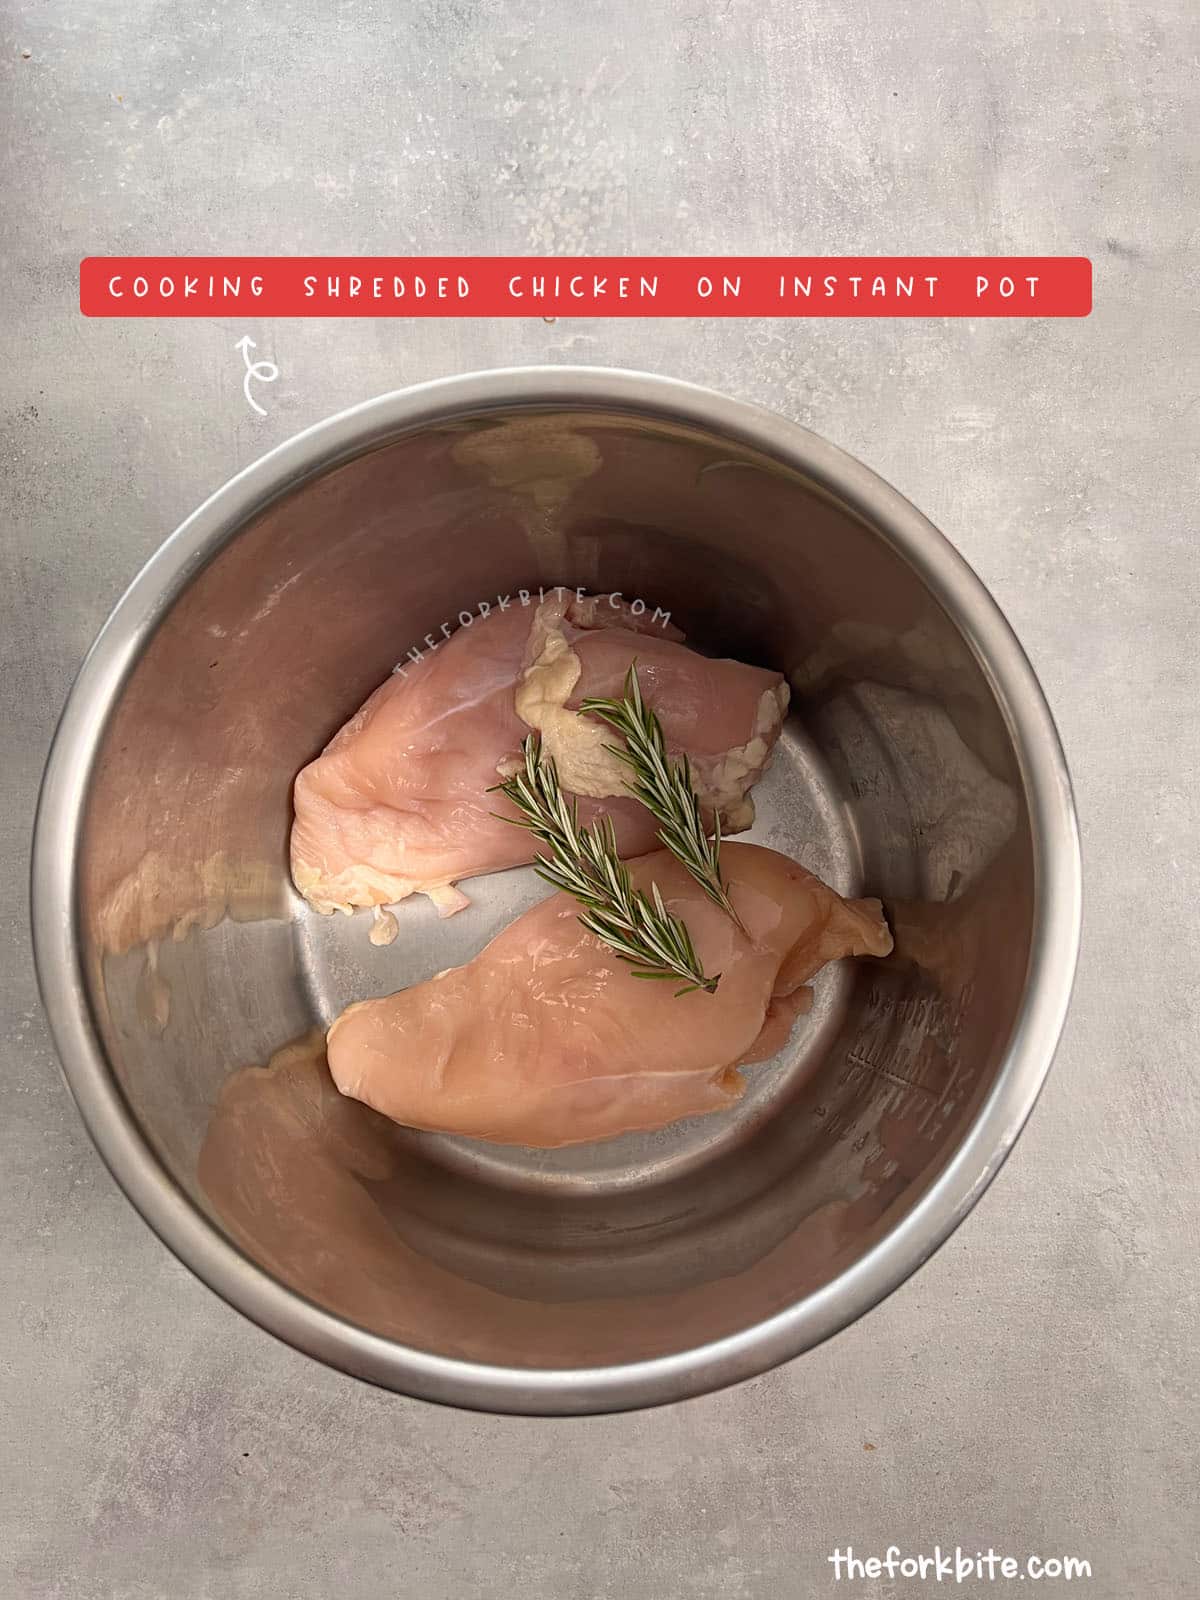 Place the chicken breasts in the Instant Pot. Generally, I don’t add water when I cook chicken for shredding in the instant pot. Do you know why? Because the chicken will render out enough juices to create a watery broth.